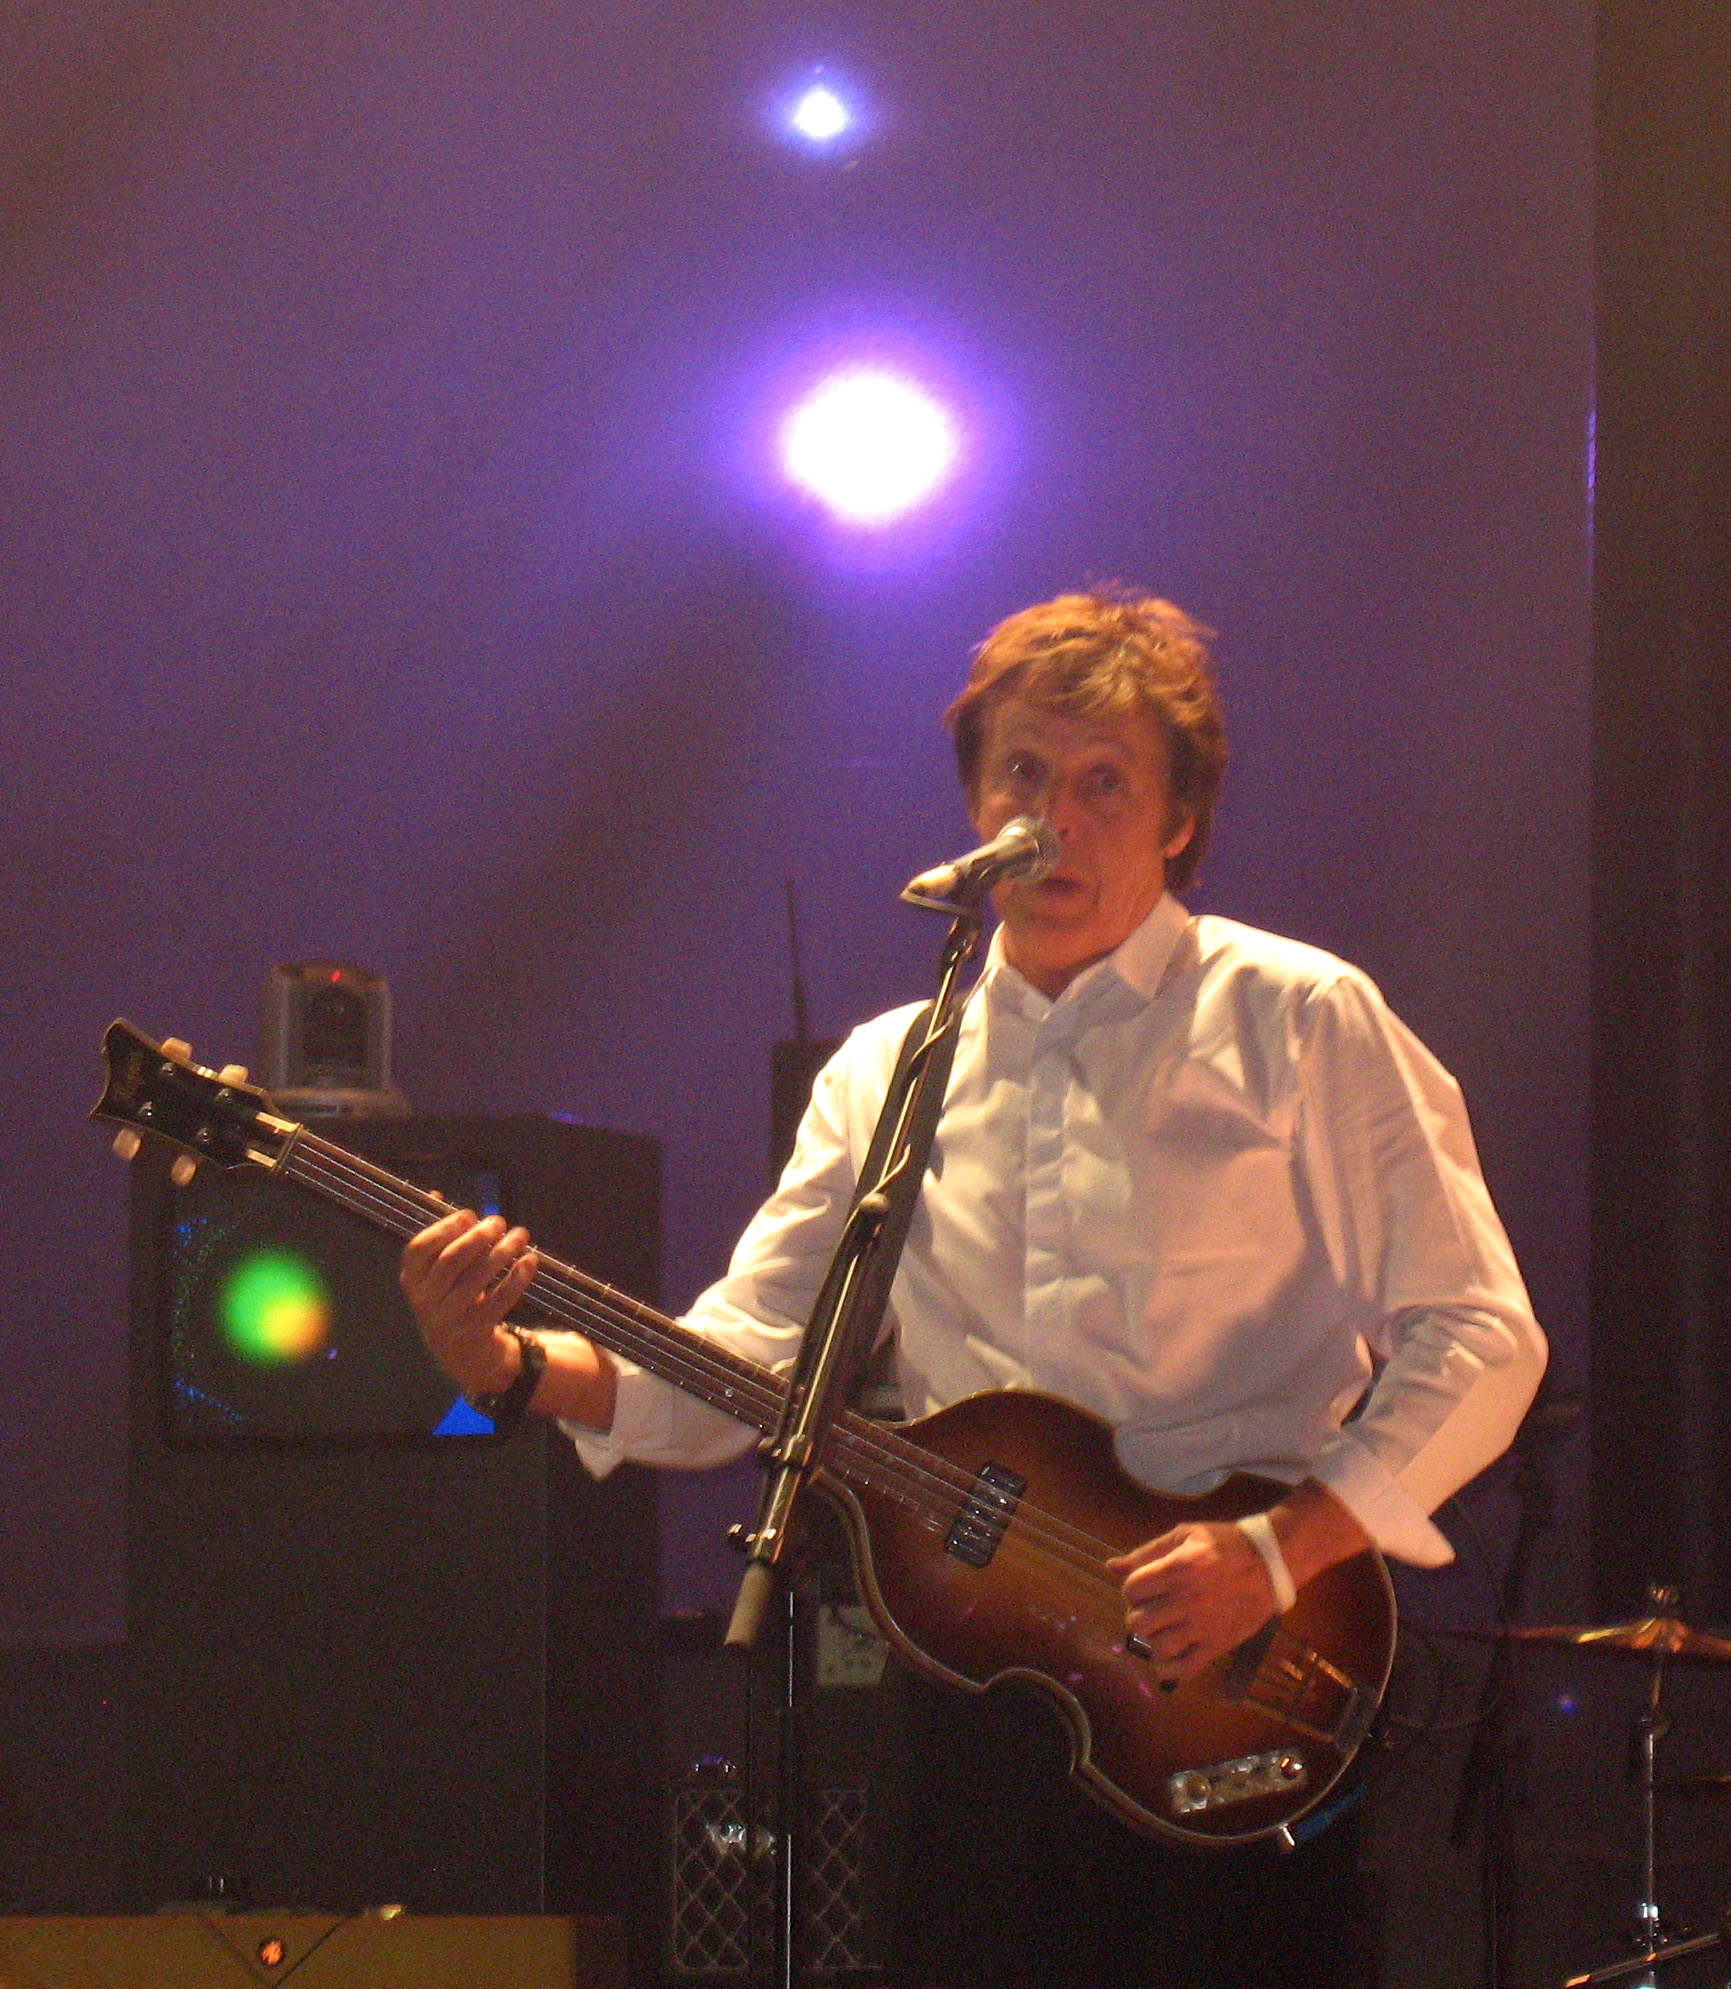 a man in white shirt playing guitar on stage